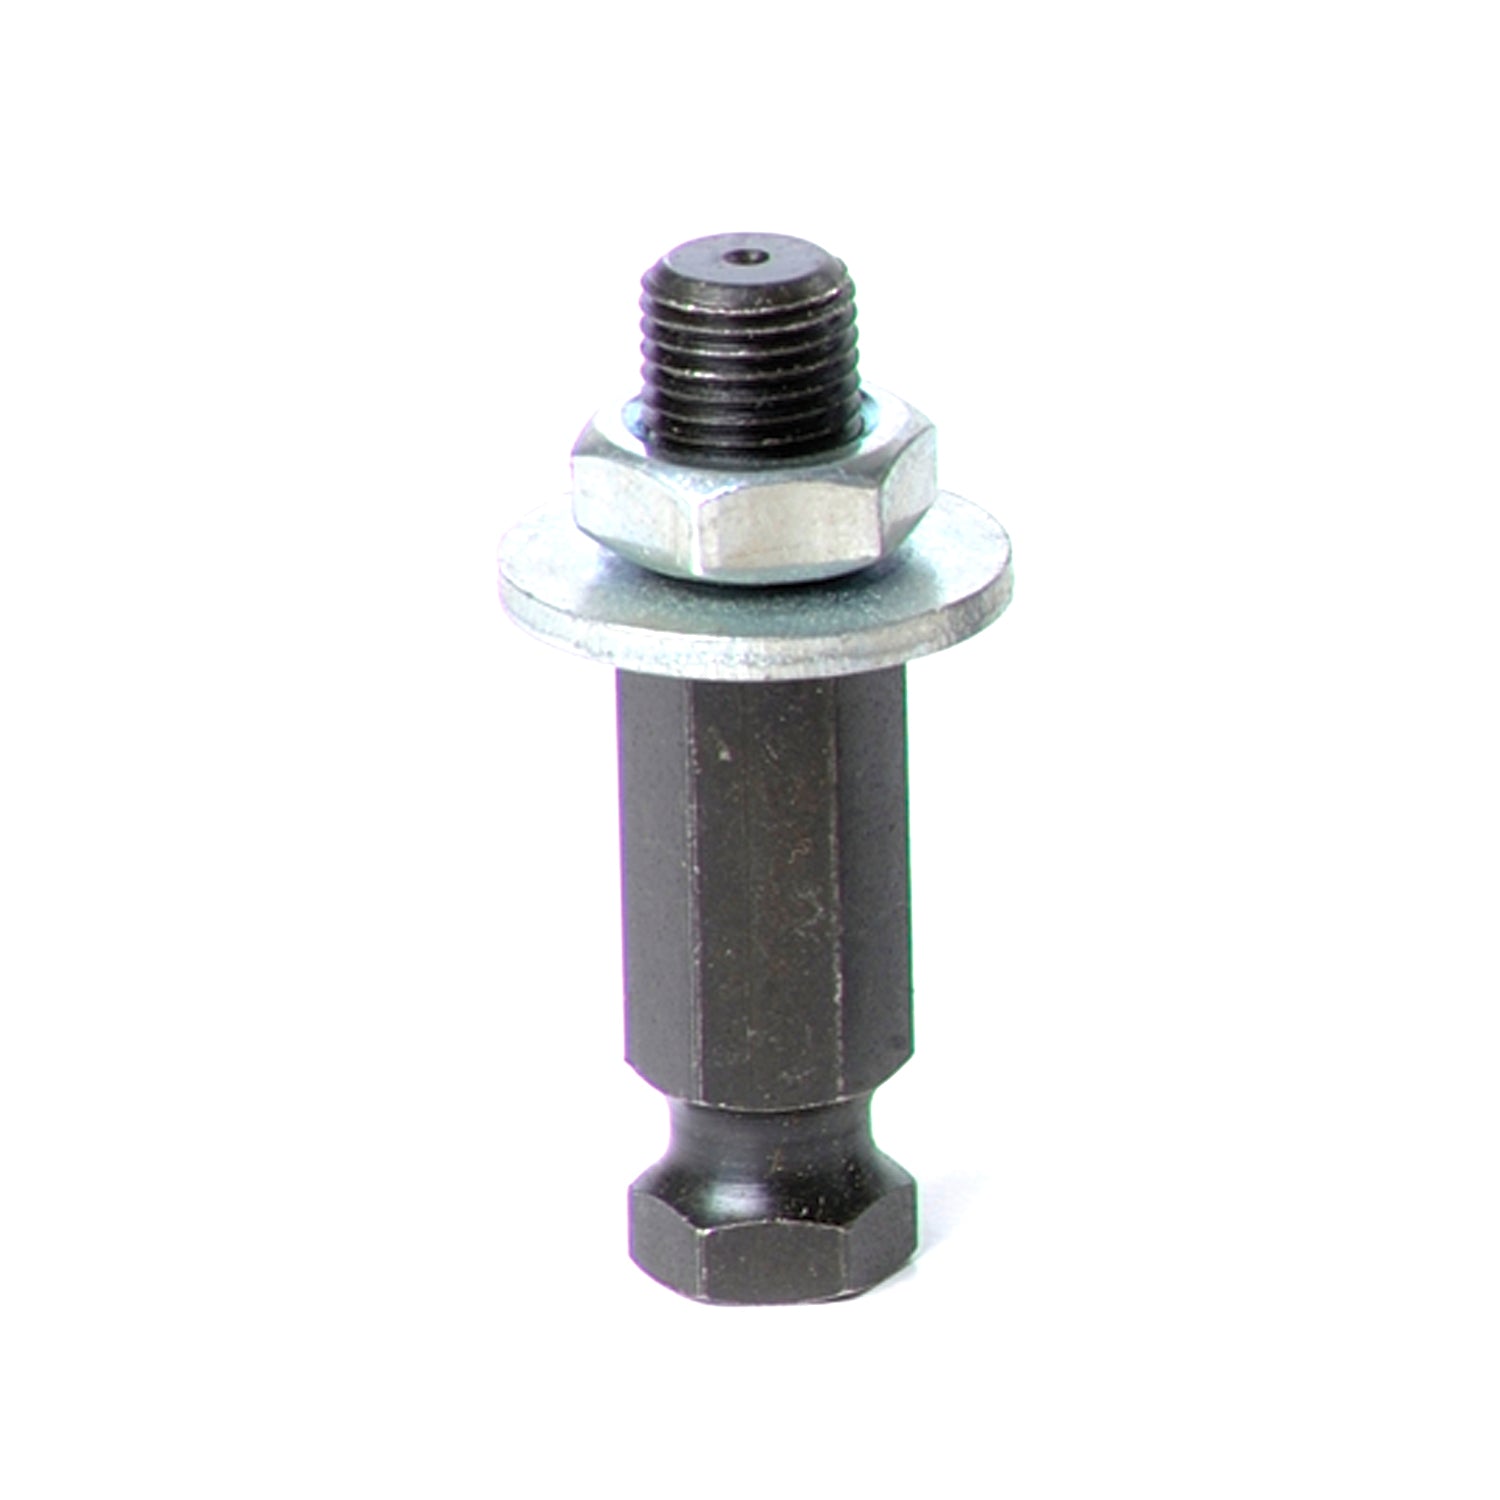 Xtra Seal Quick Change Adapter, 5/8" x 3/8" threads